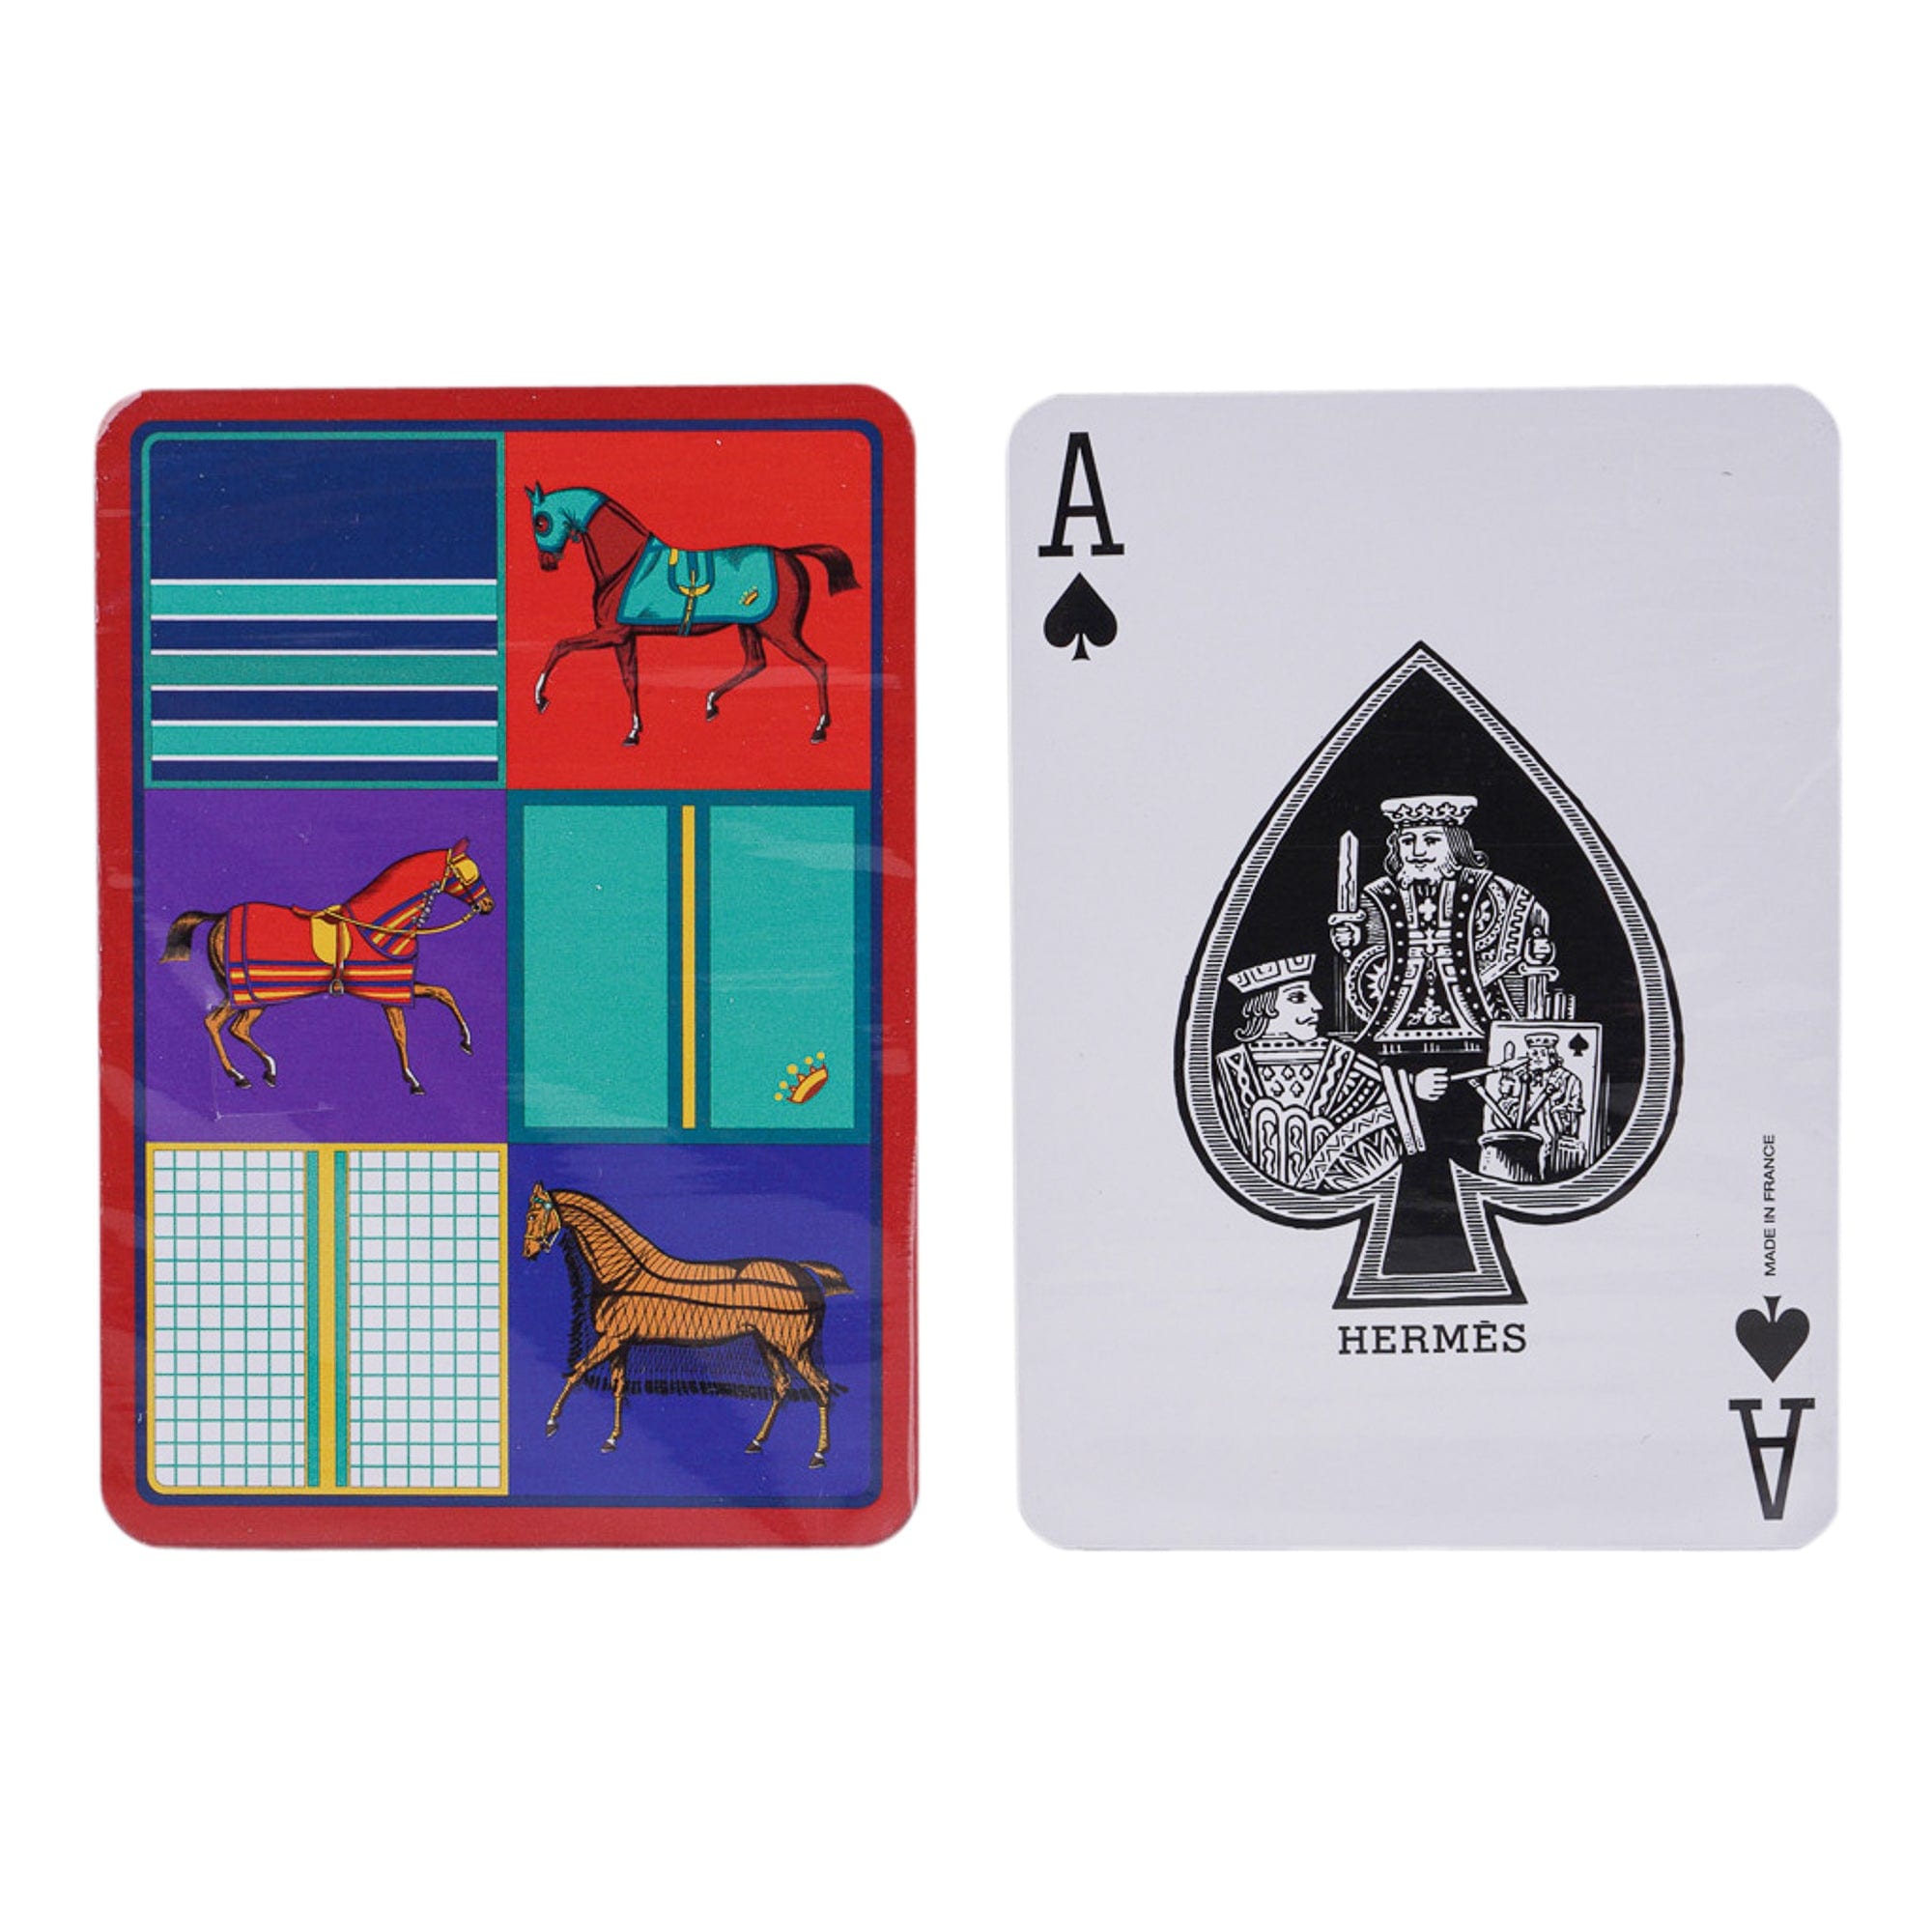 hermes playing cards